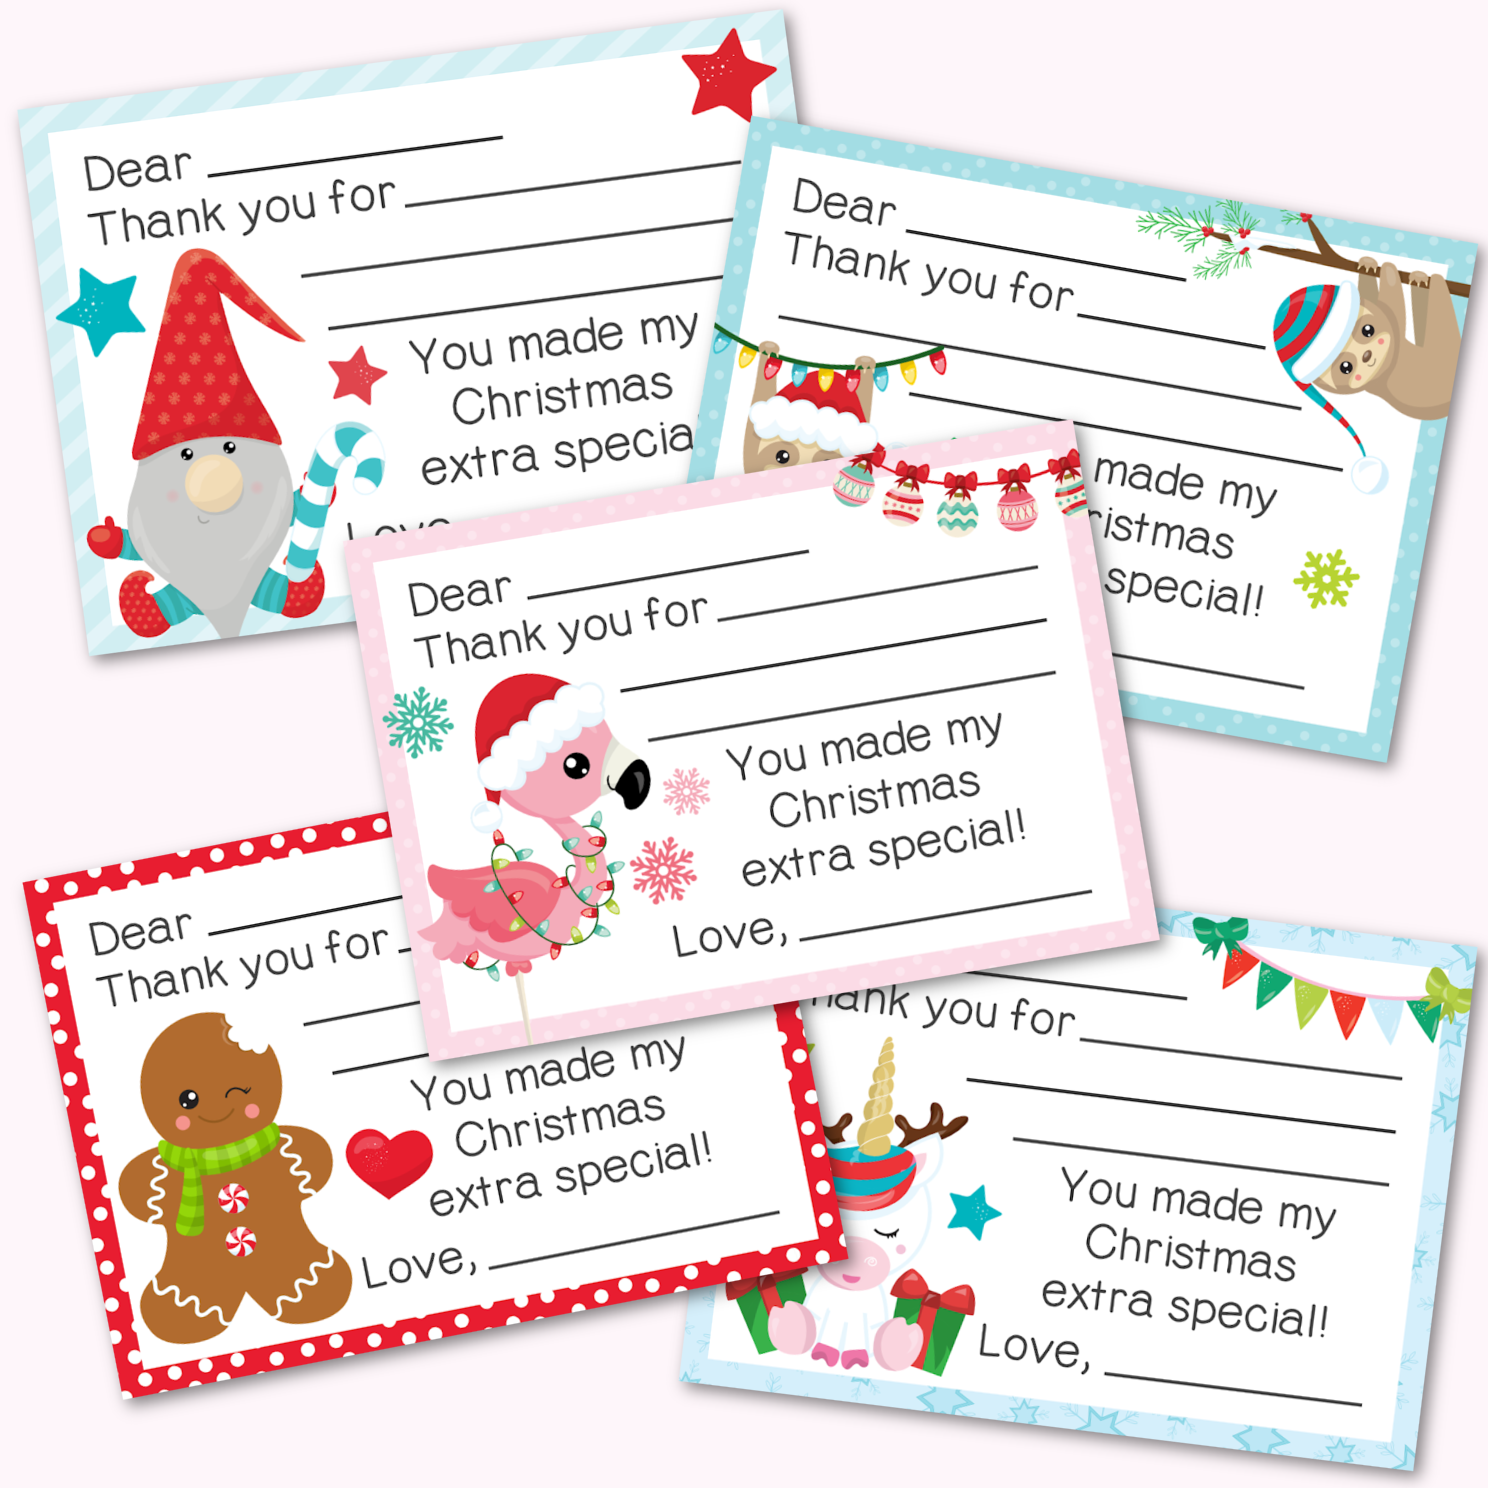 Fill-in-the-Blank Christmas Thank You Cards {Free Printable}